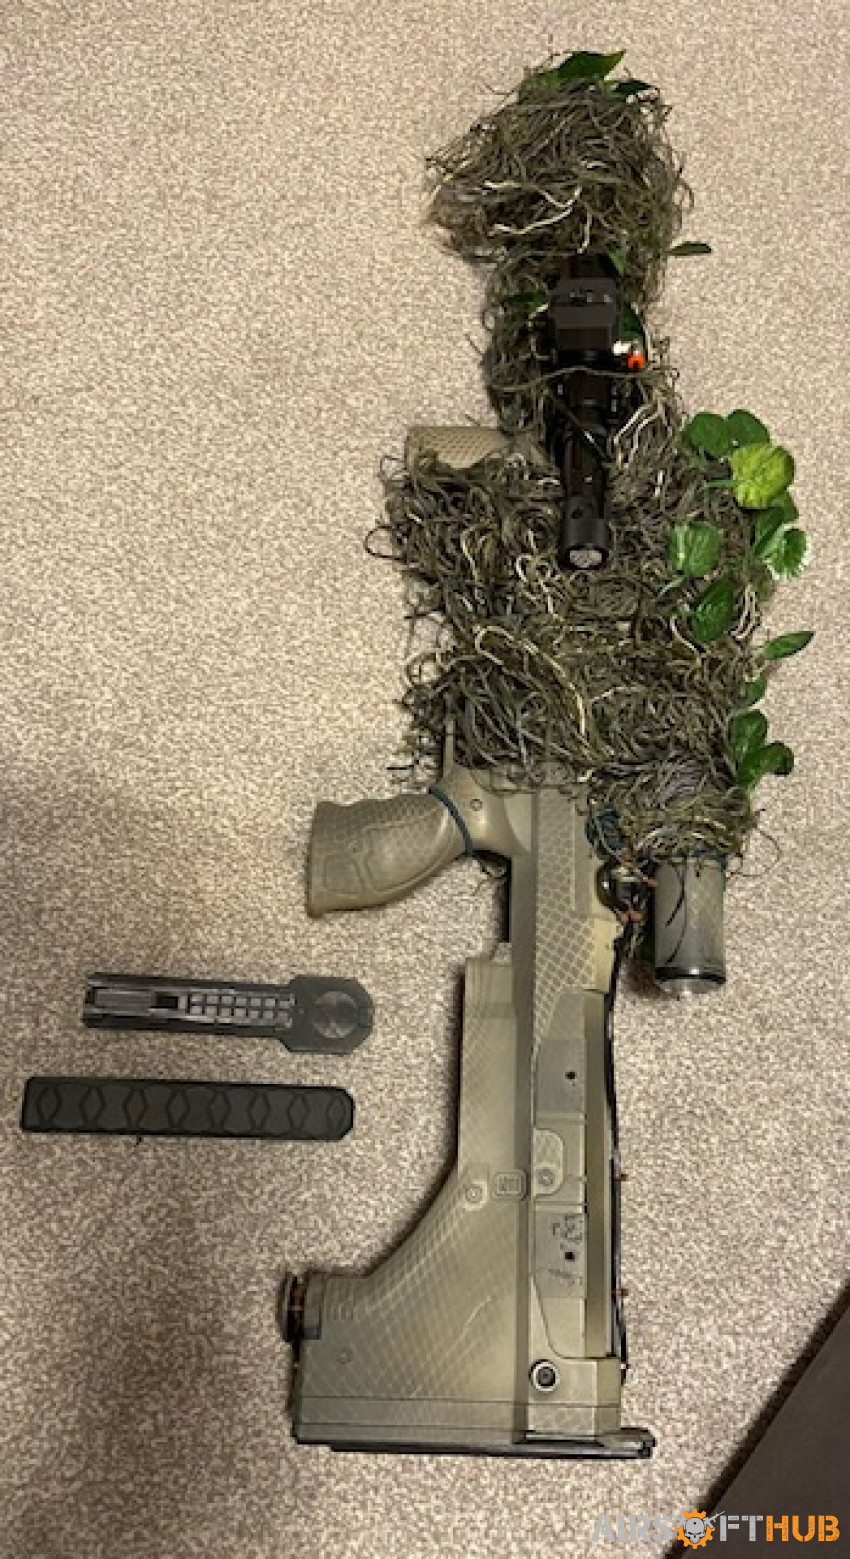 HPA / CO2 SRS Sniper - Used airsoft equipment